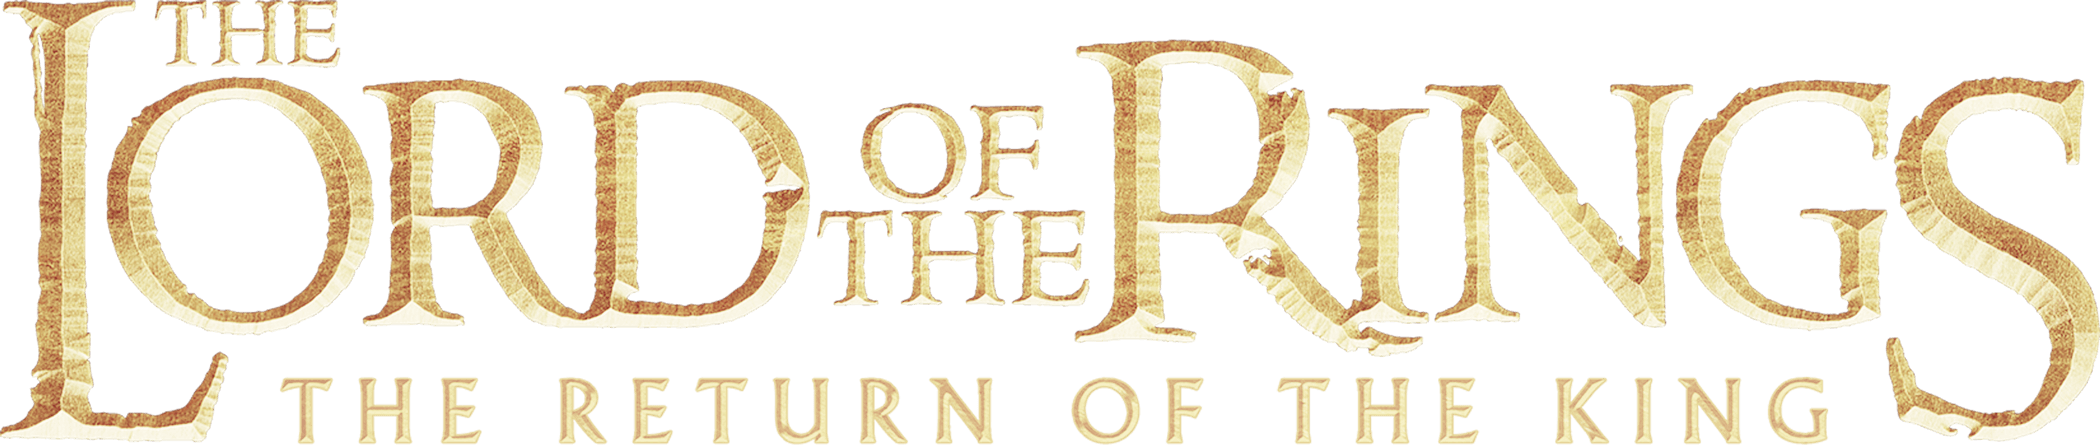 The Lord of the Rings: The Return of the King logo